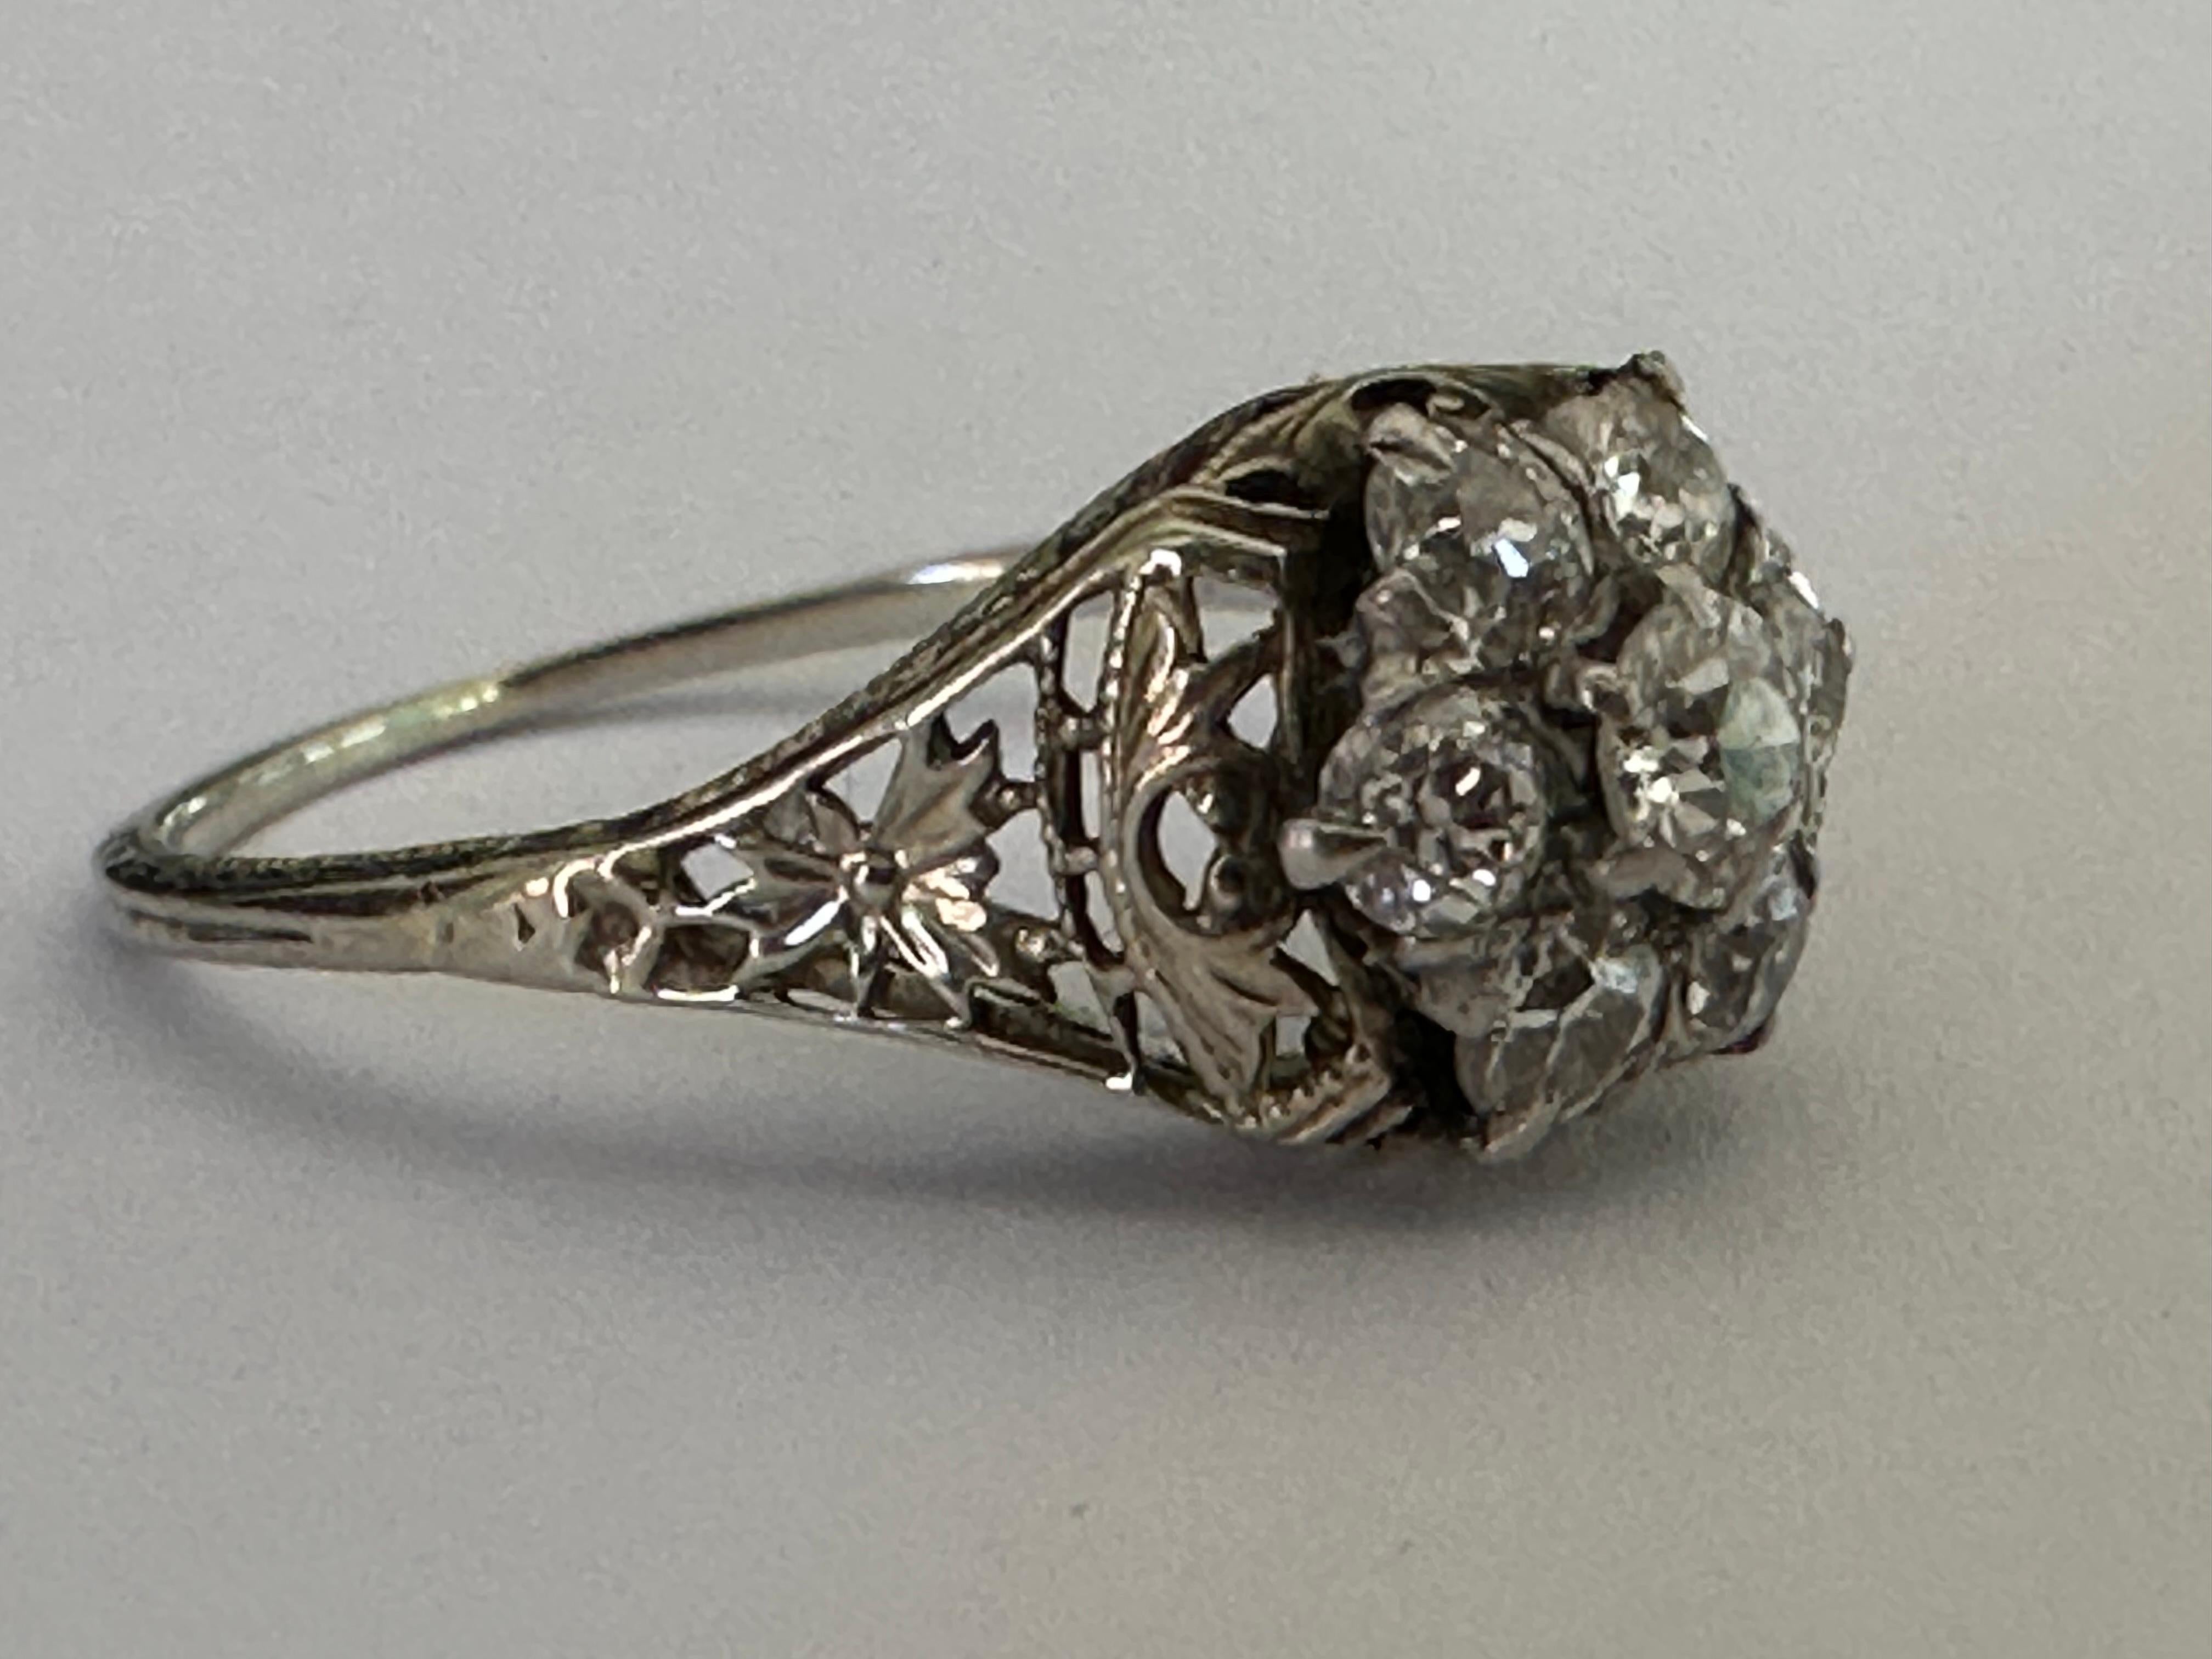 Crafted in the early 1900s, this Edwardian Era gem features seven Old European cut diamonds in a floral design weighing approximately 0.70 carats, G-H color, VS2 clarity, and set in an intricate filigree band fashioned in 18K white gold. 